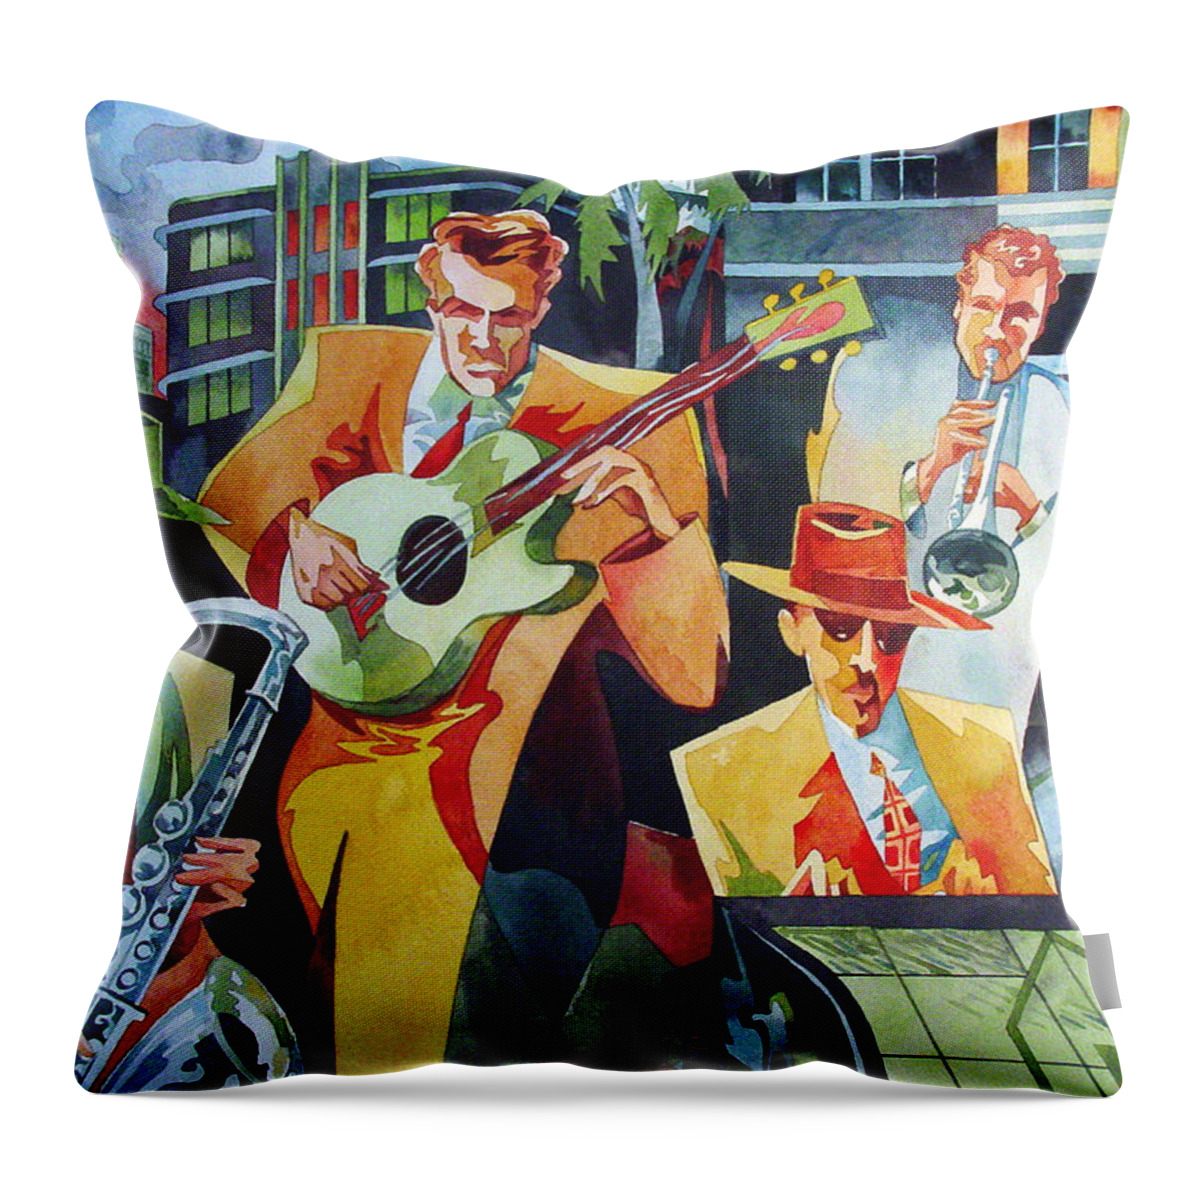 Watercolor Throw Pillow featuring the painting South Beach Rhythm by Mick Williams